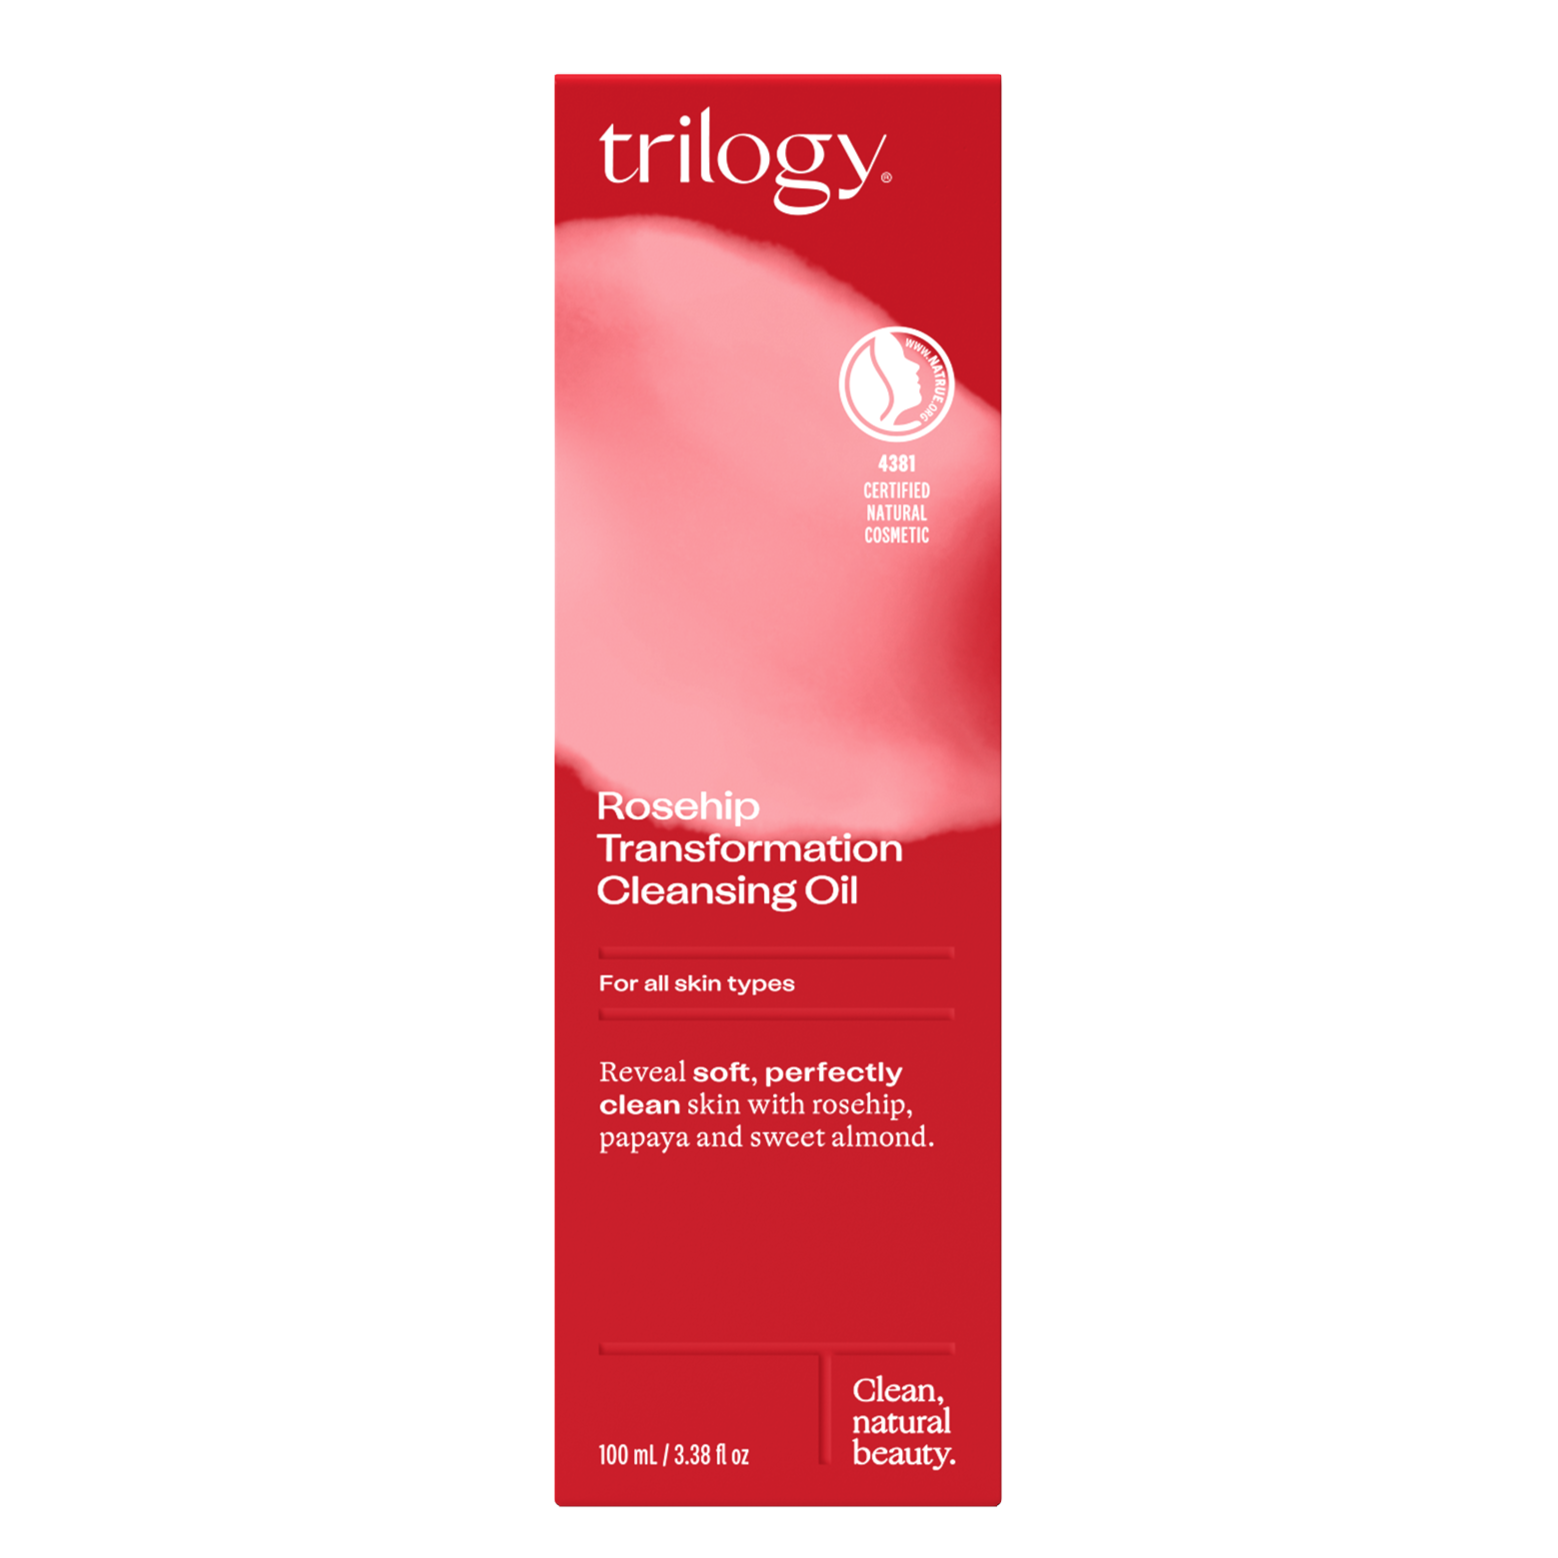 TRILOGY Rosehip Transformation Cleansing Oil (100ml)